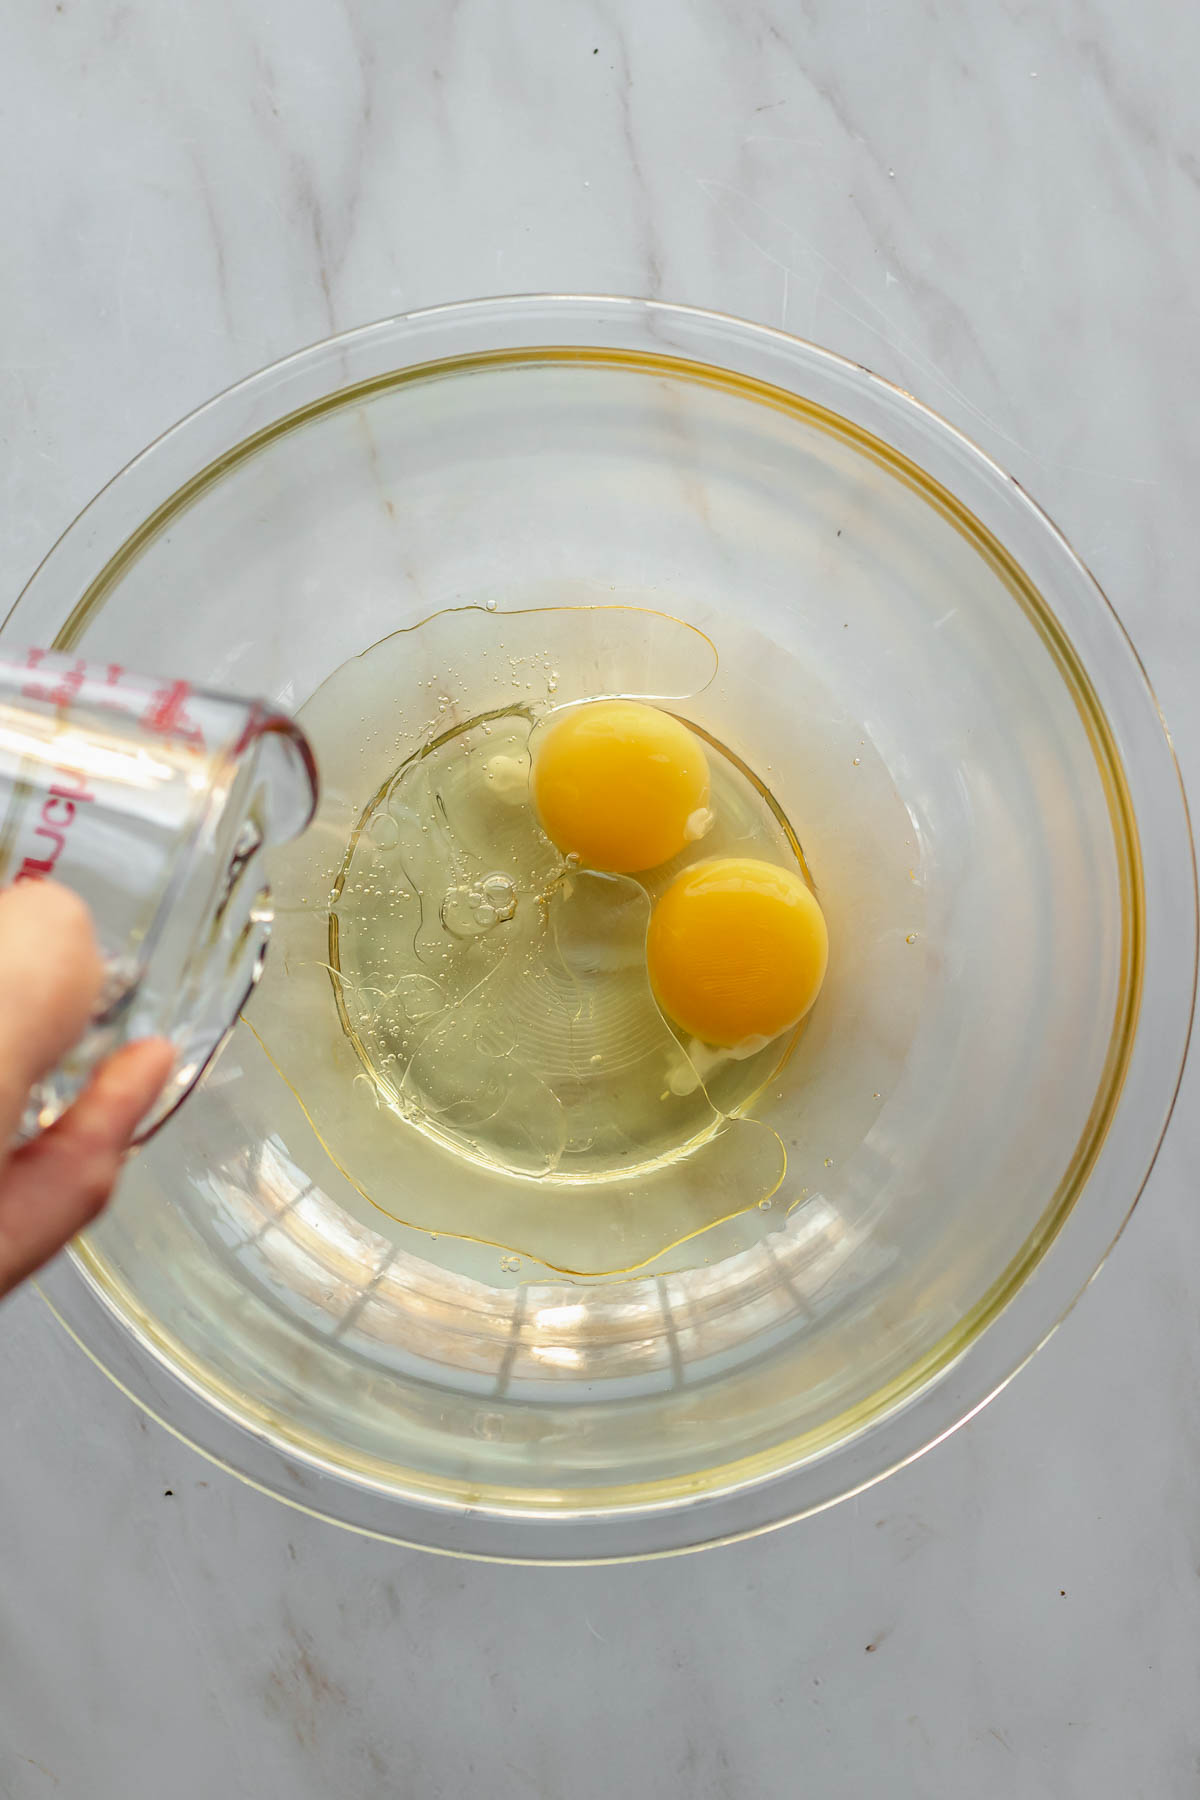 A glass measuring cup pours oil into a bowl with eggs.